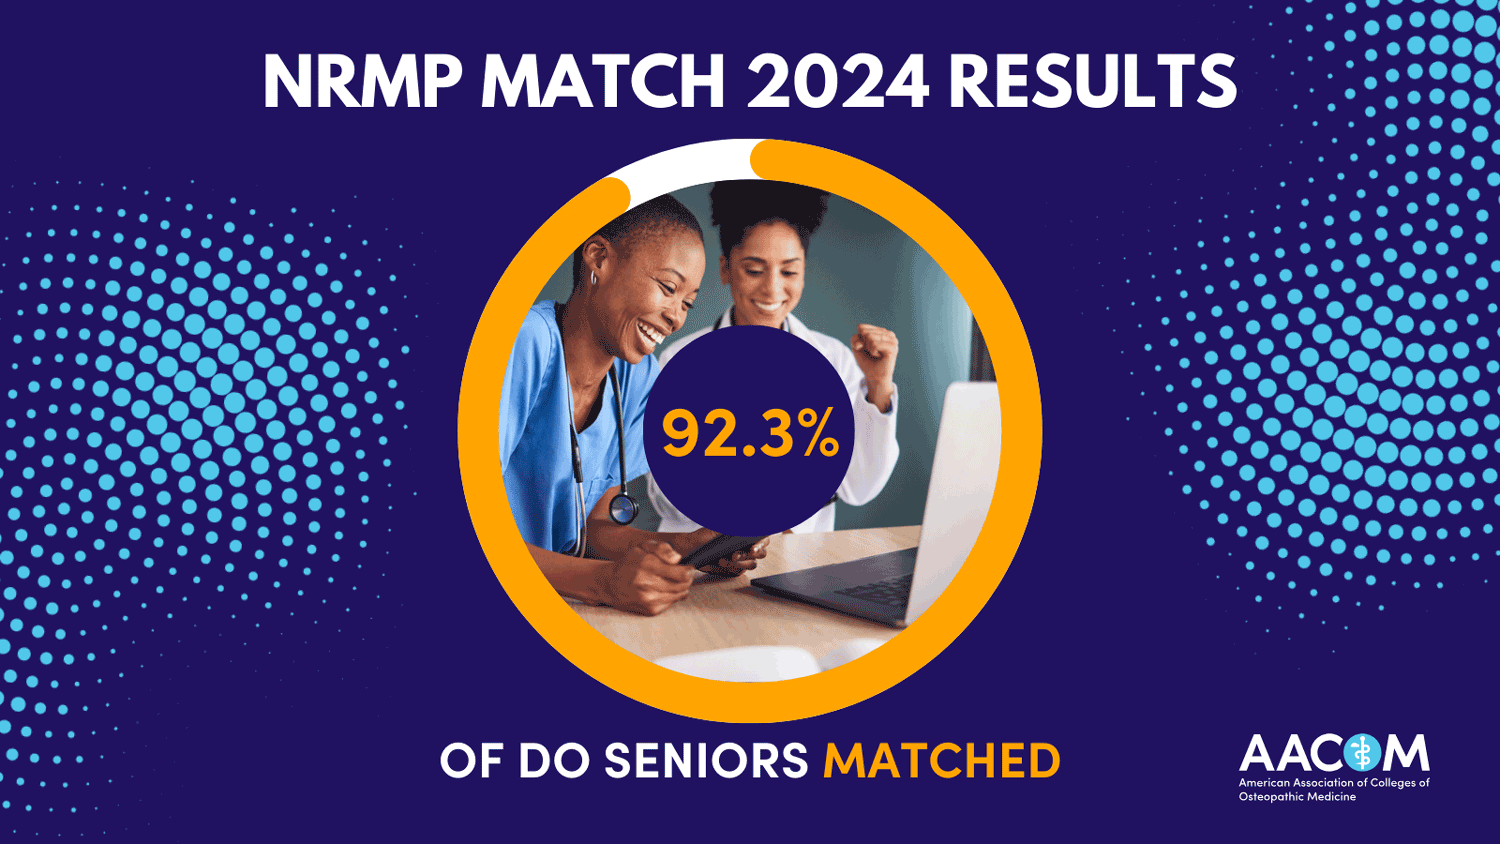 2024 NRMP Match Results - 92.3% of DO Seniors Matched